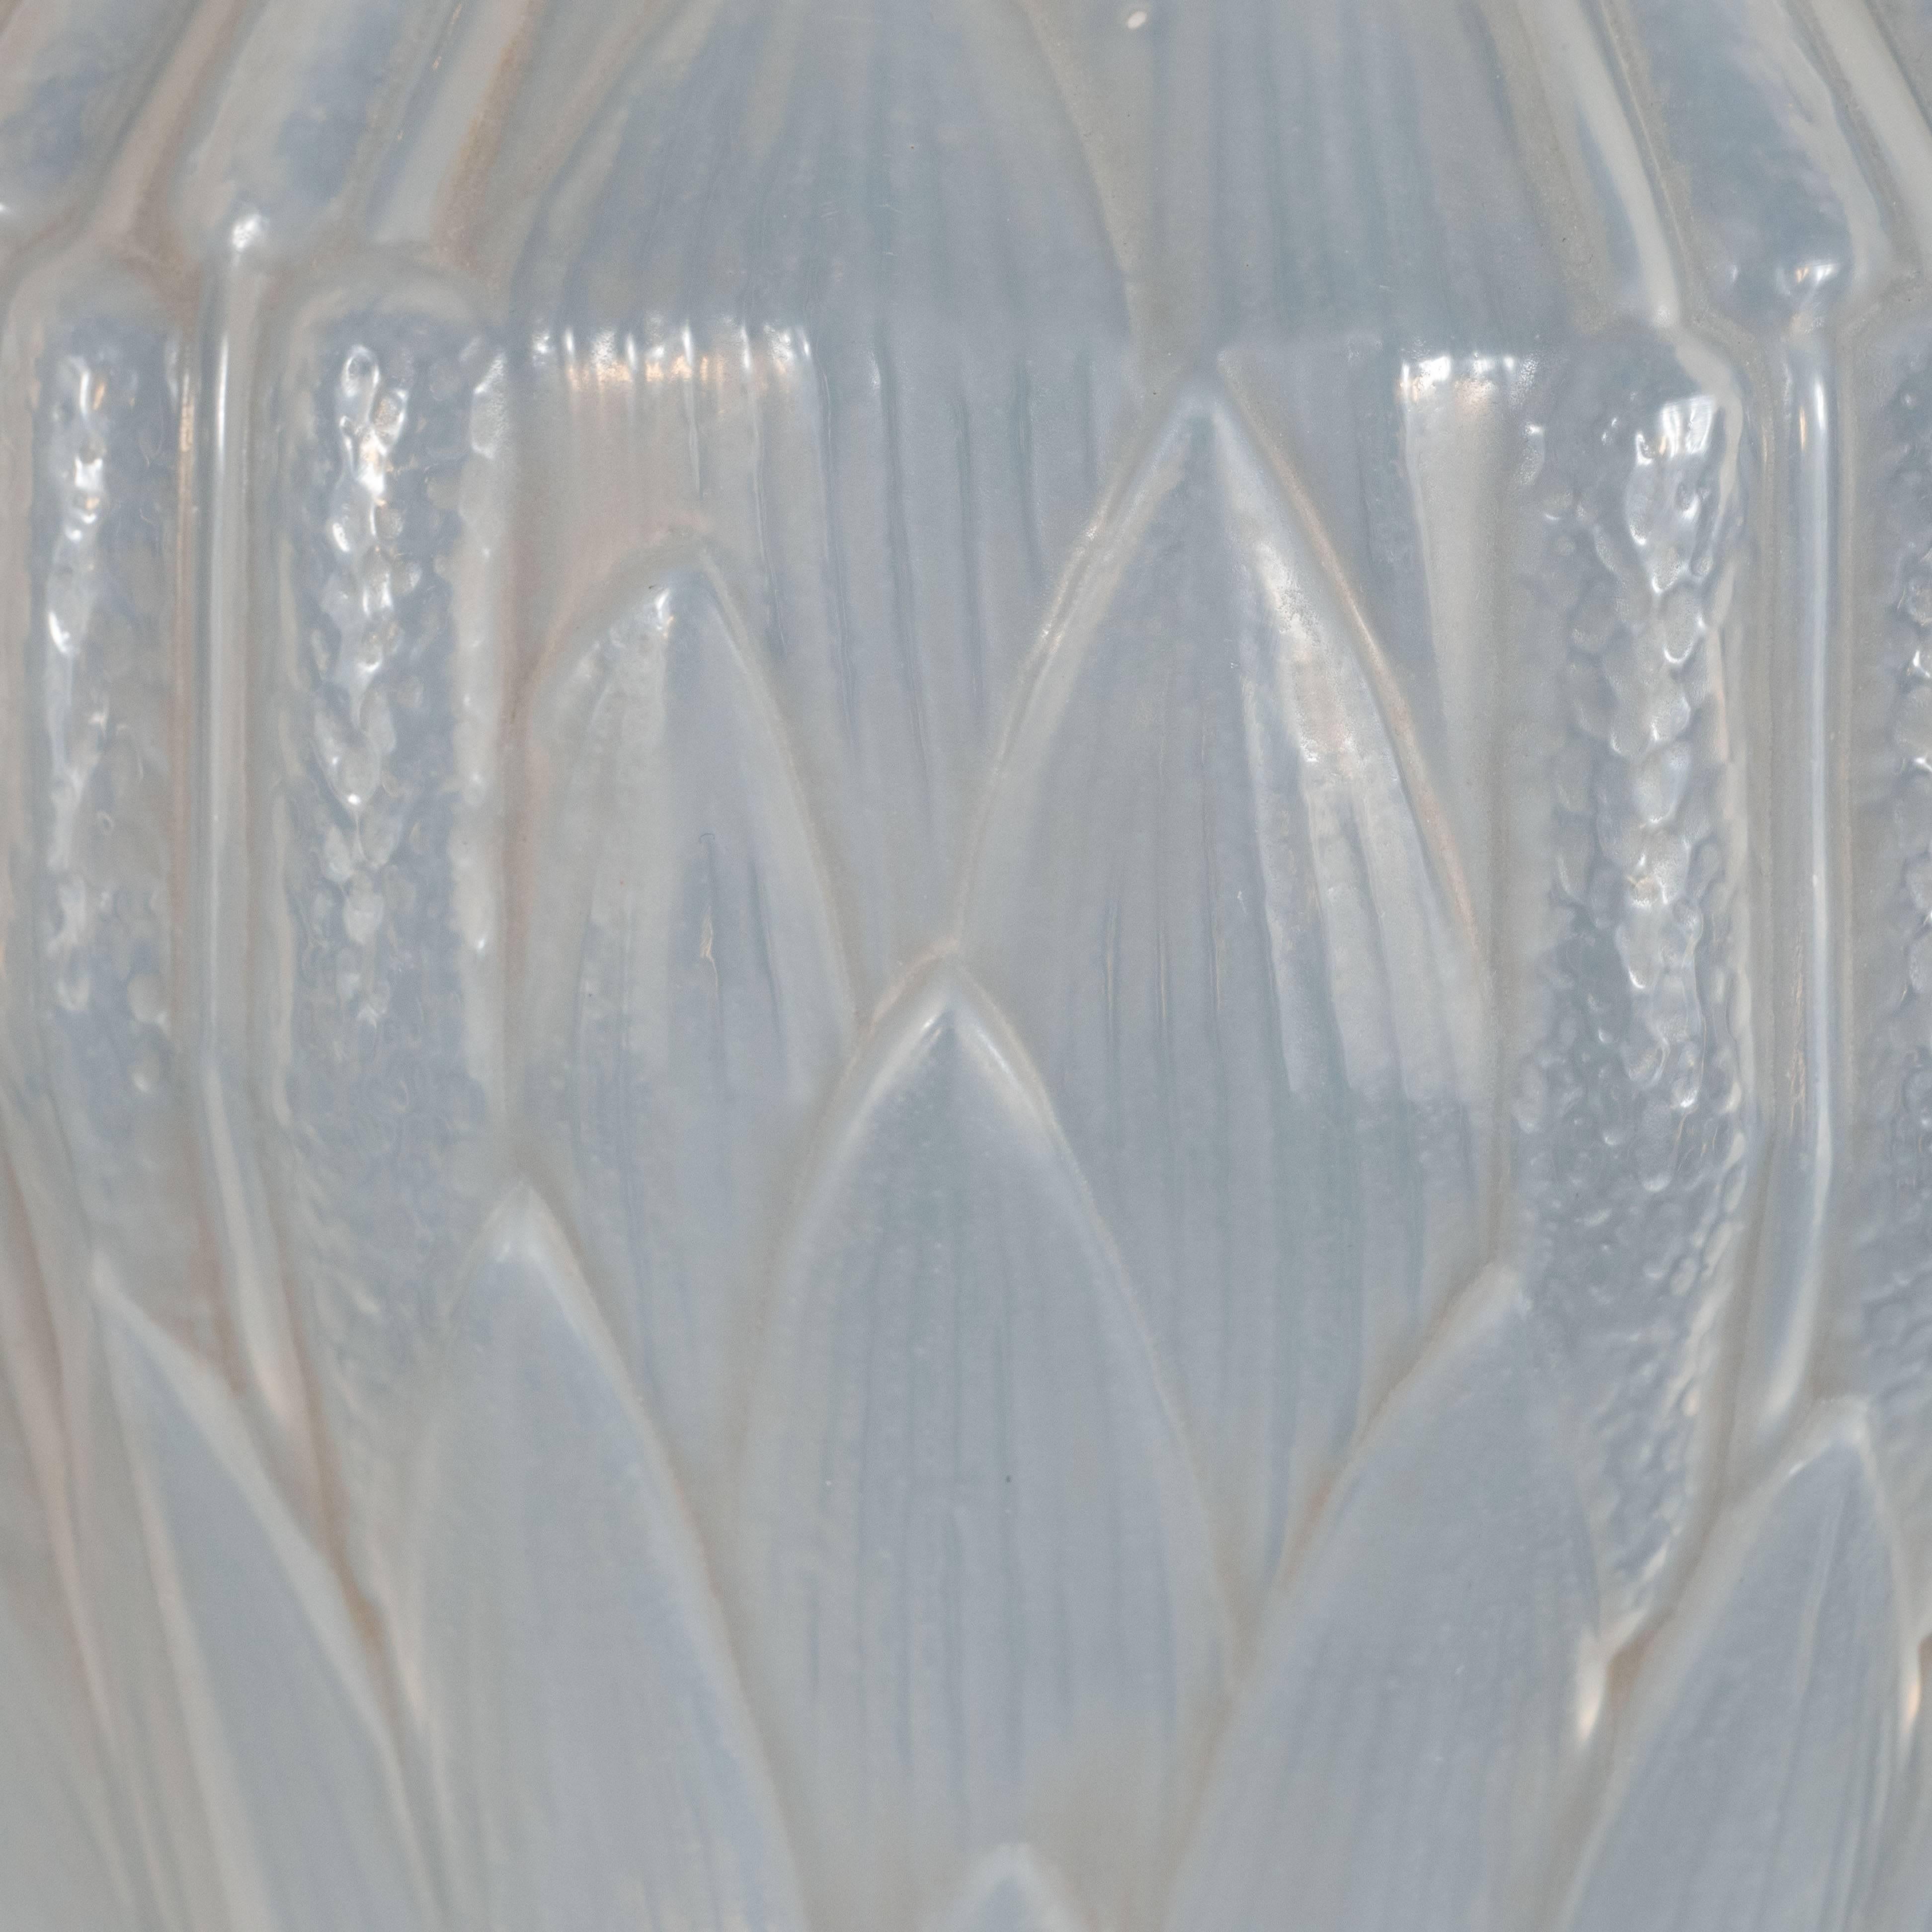 Art Glass Art Deco Opalescent Handblown Vase with Geometric Patterns by Andre Hunebelle